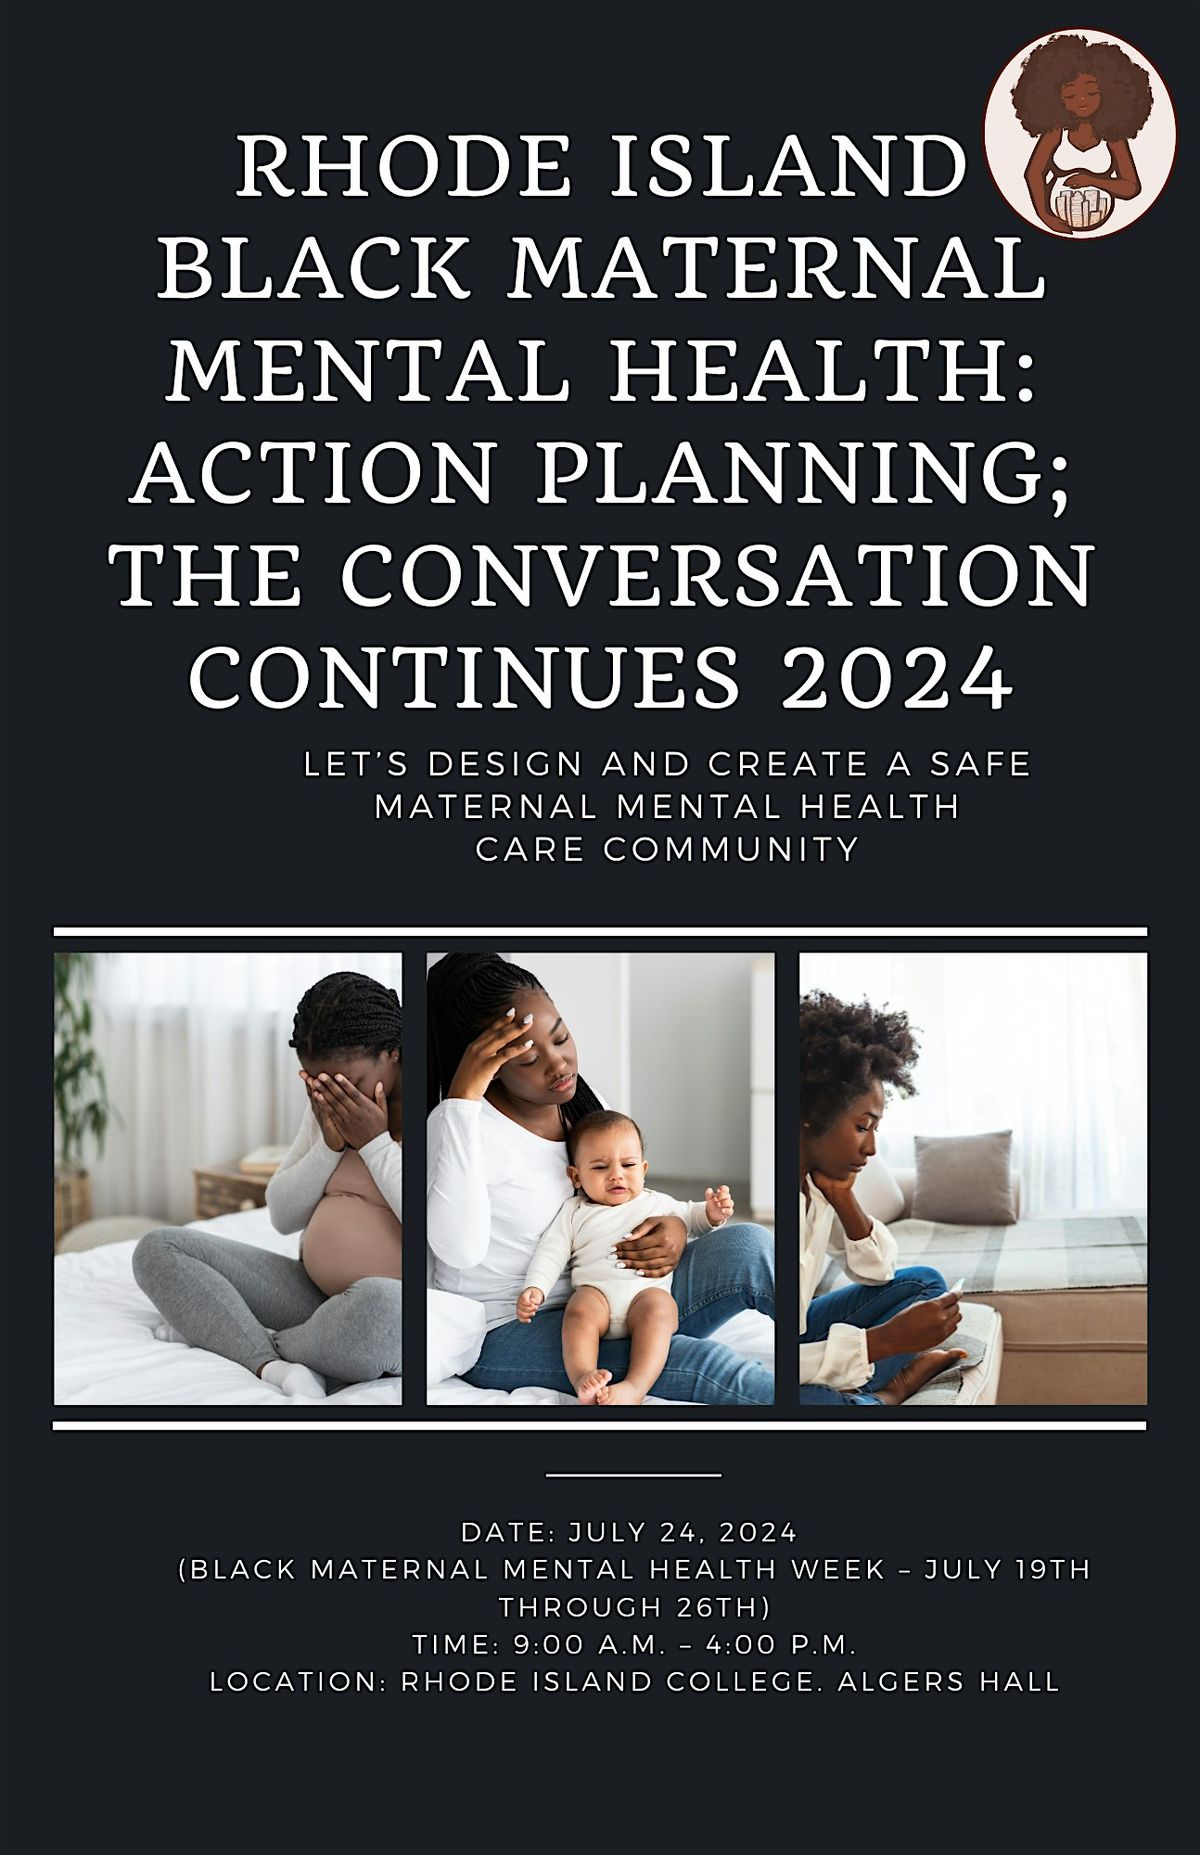 Black Maternal Mental Health: Action Planning; The Conversation Continues